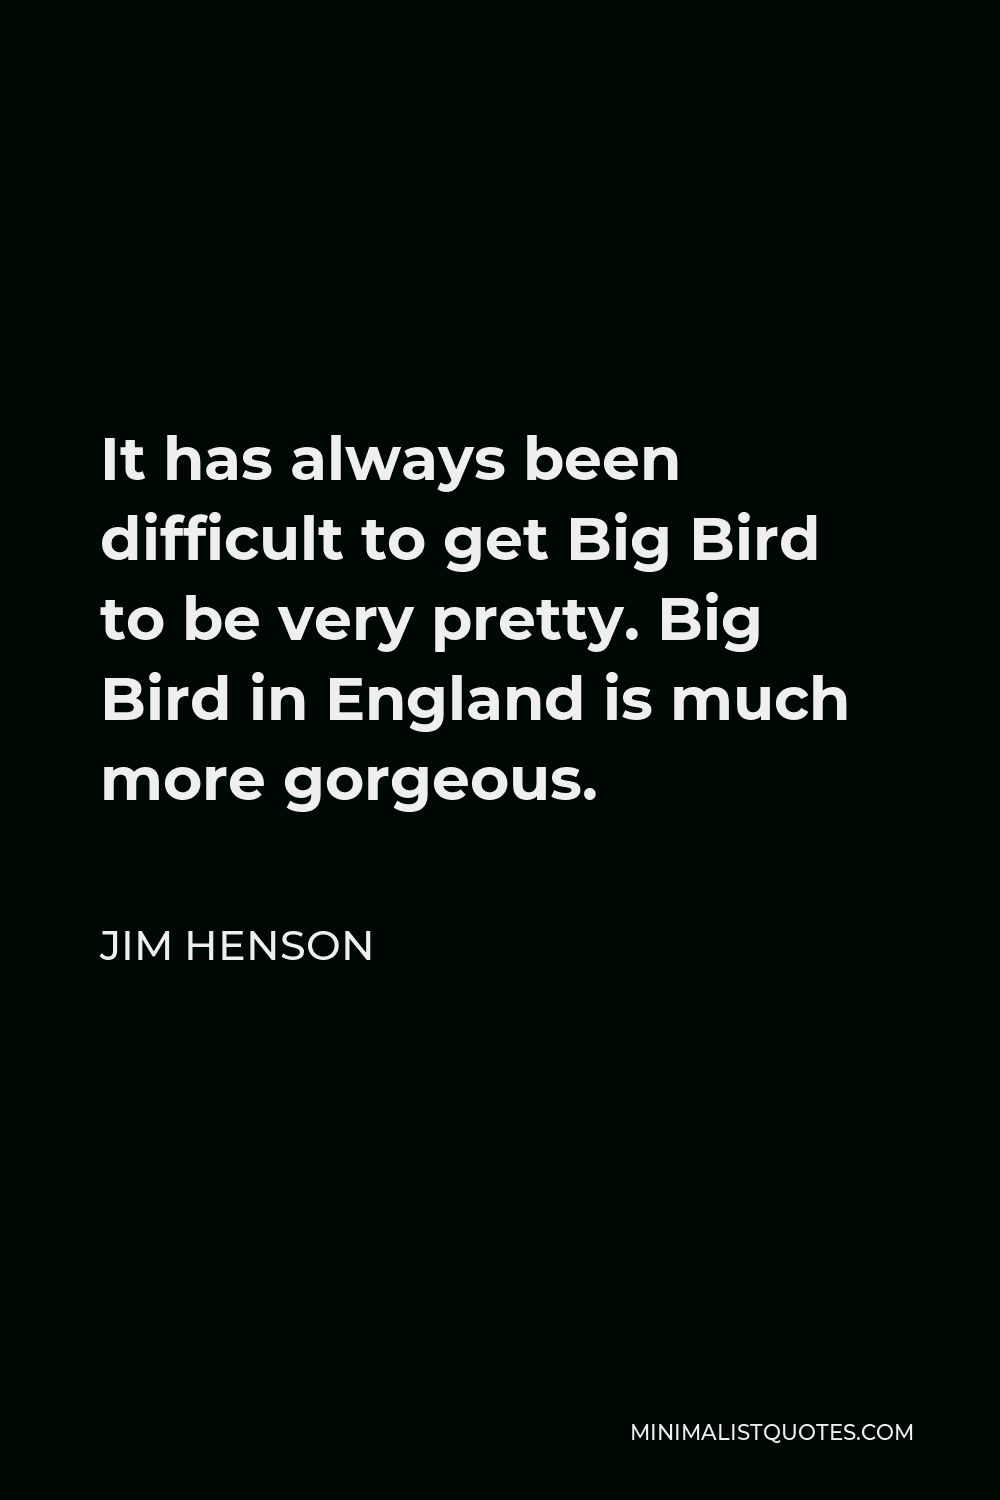 Jim Henson Quote - It has always been difficult to get Big Bird to be very pretty. Big Bird in England is much more gorgeous.